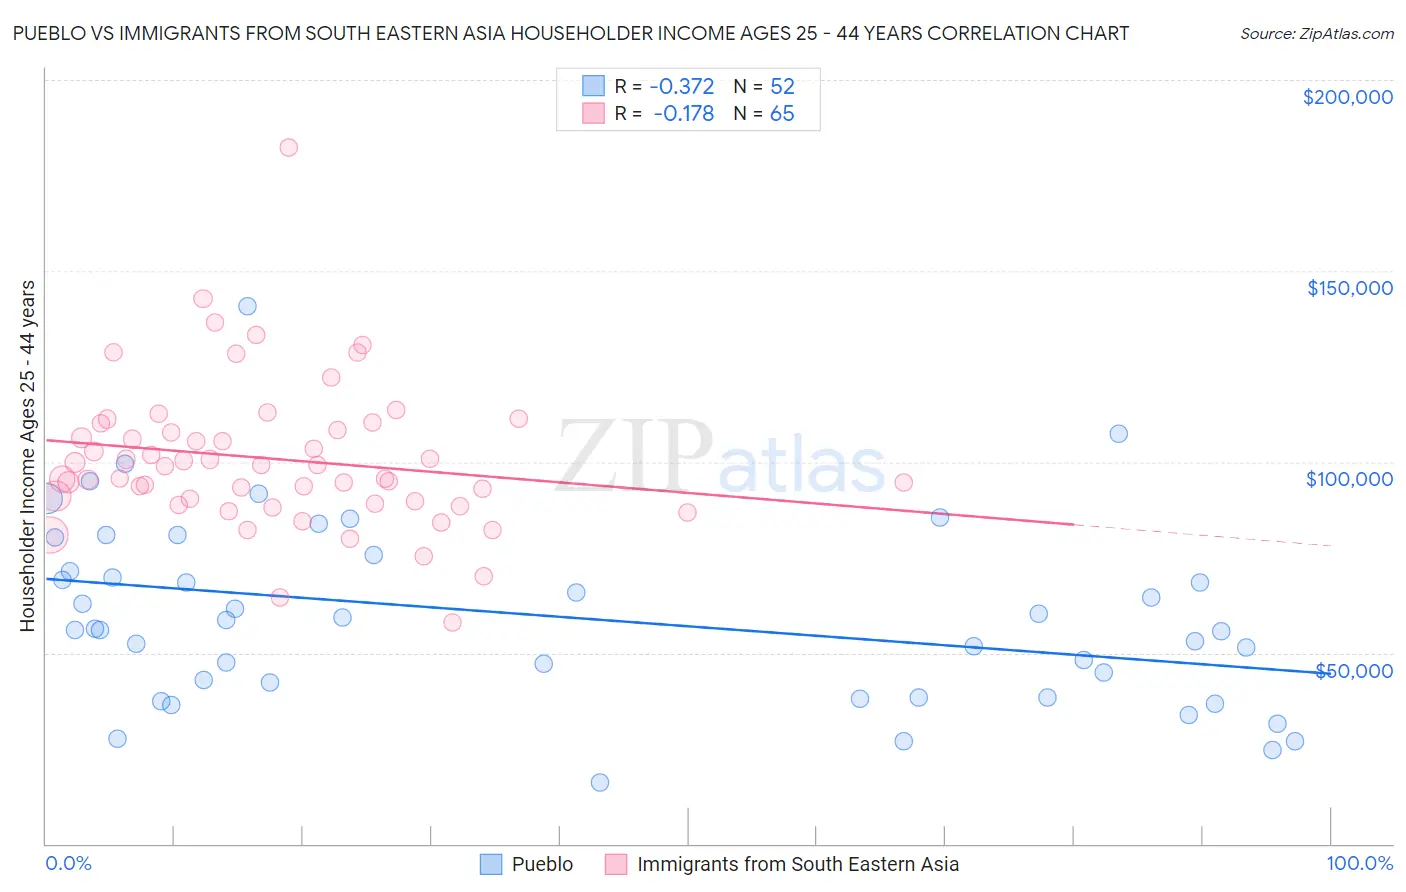 Pueblo vs Immigrants from South Eastern Asia Householder Income Ages 25 - 44 years